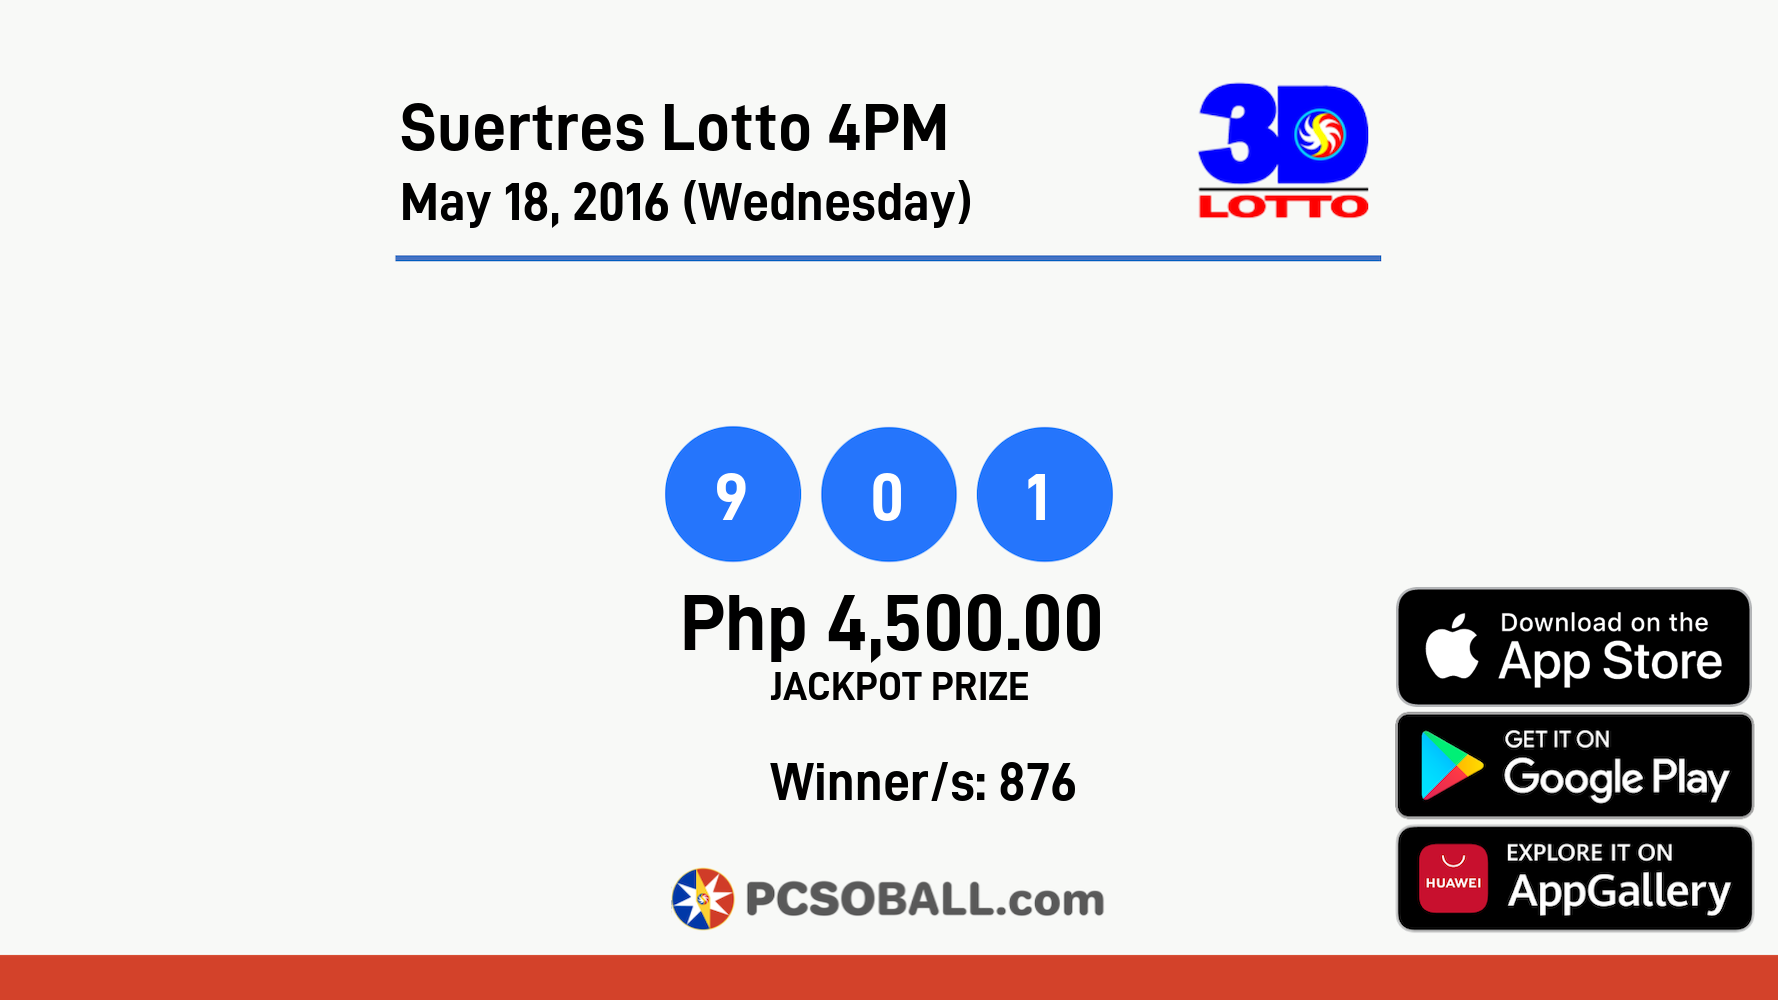 Suertres Lotto 4PM May 18, 2016 (Wednesday) Result